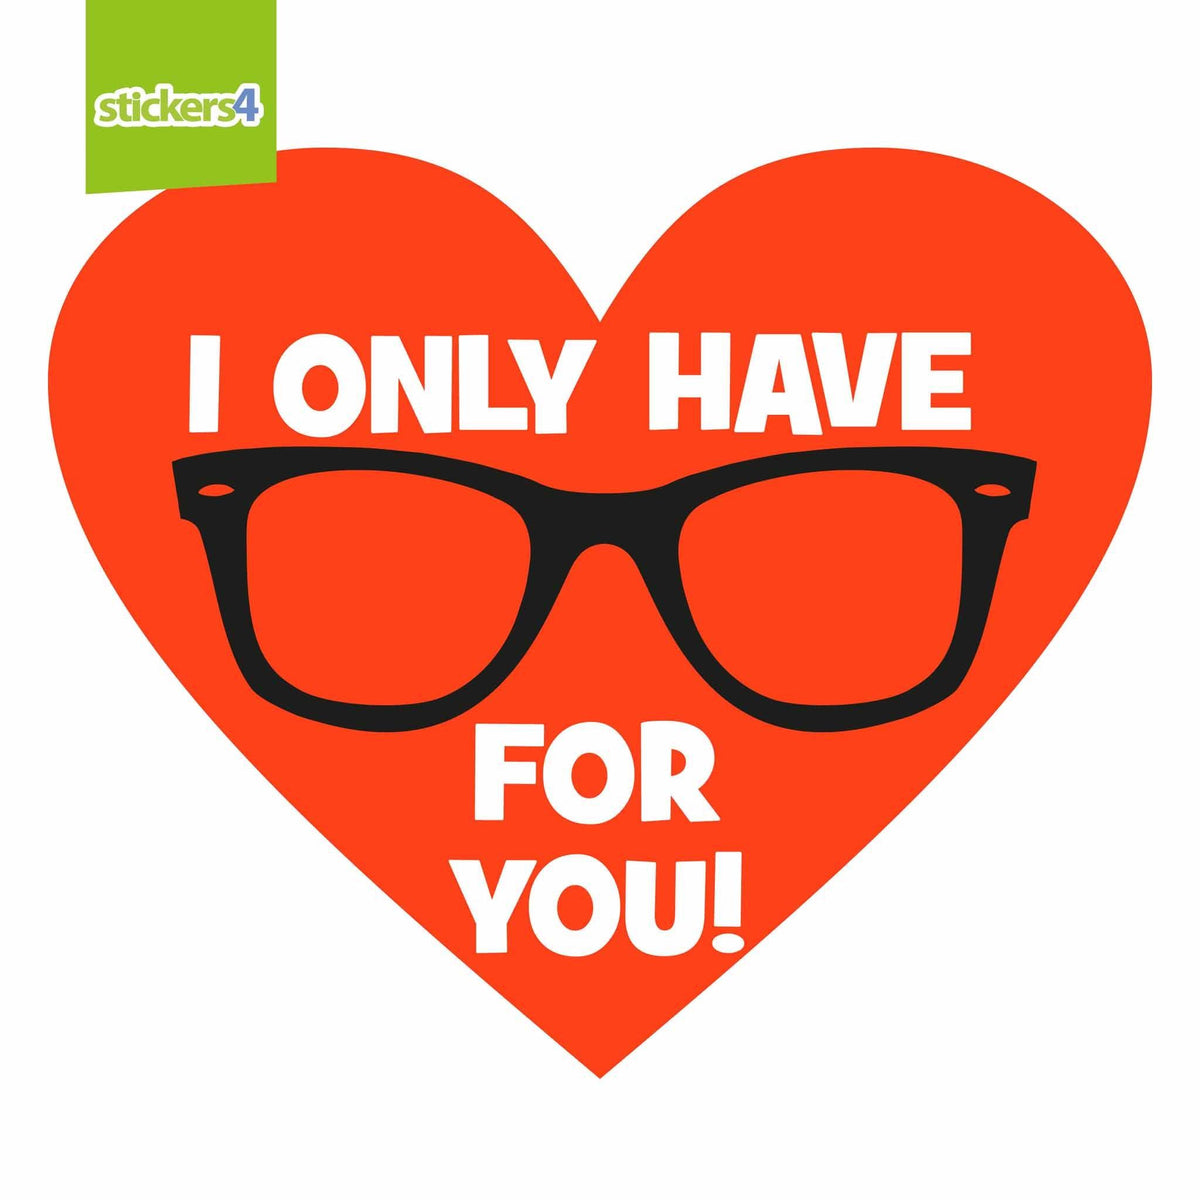 I Only Have Eyes For You (Red Heart) Window Cling Sticker